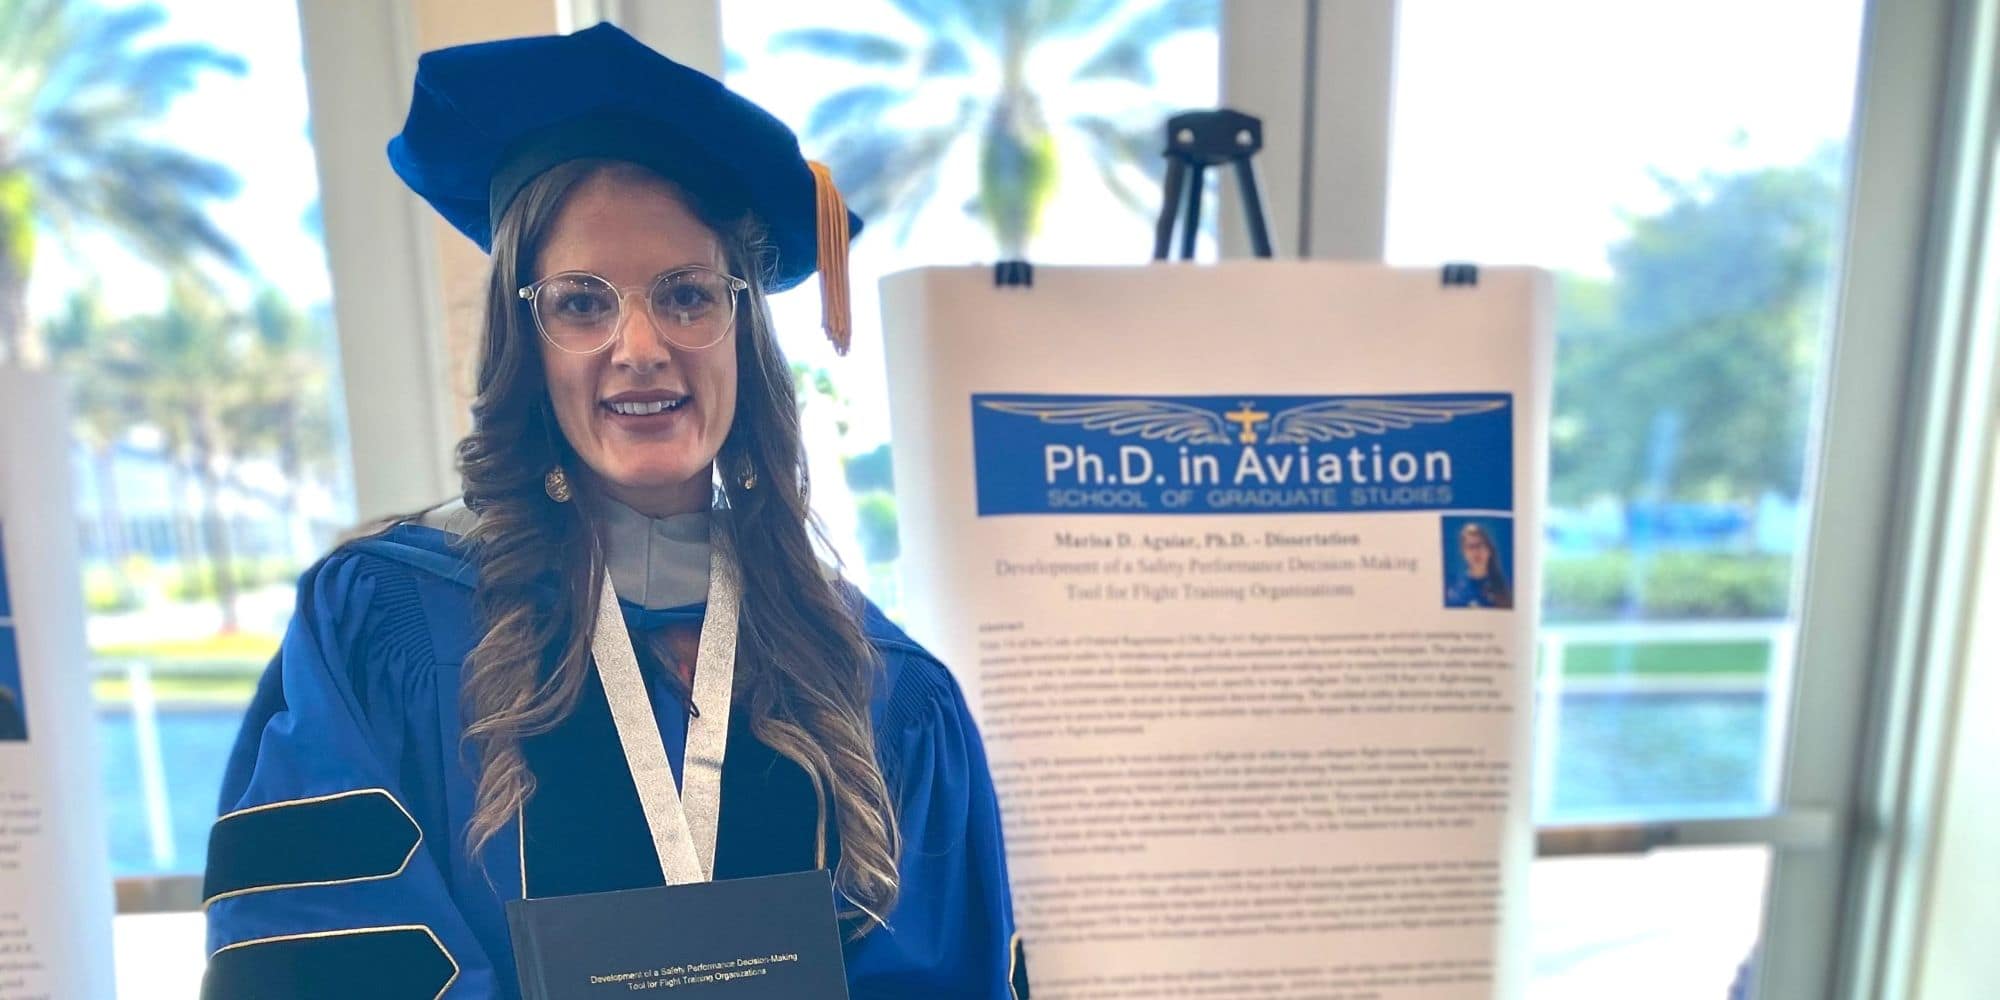 Double alumna Marisa Aguiar recently earned her Ph.D. in Aviation to go along with her M.S. in Aeronautics.